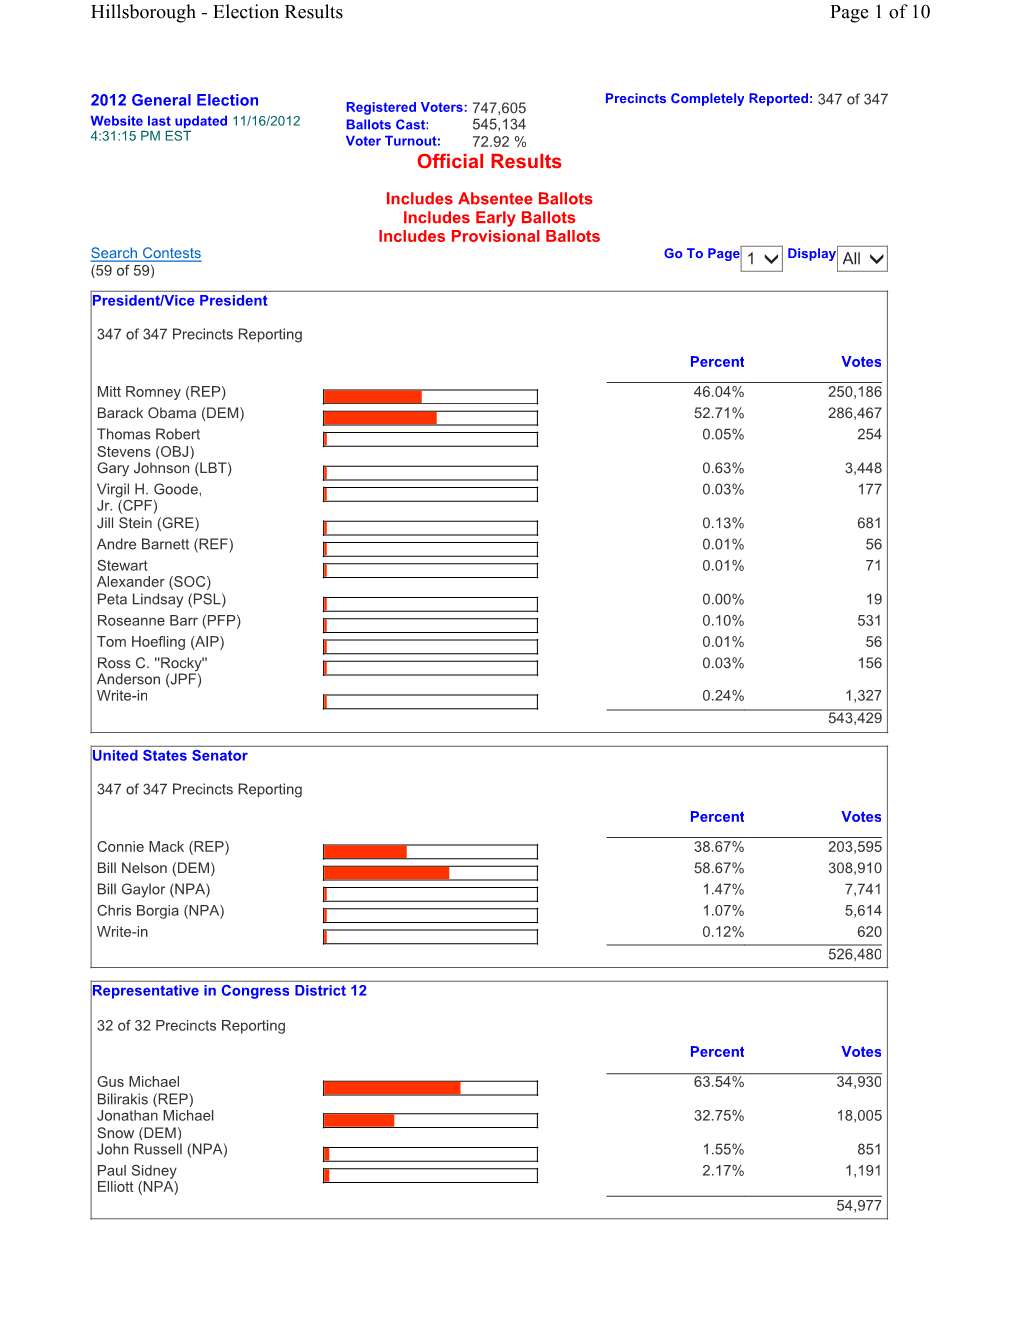 2012 General Election Official Results